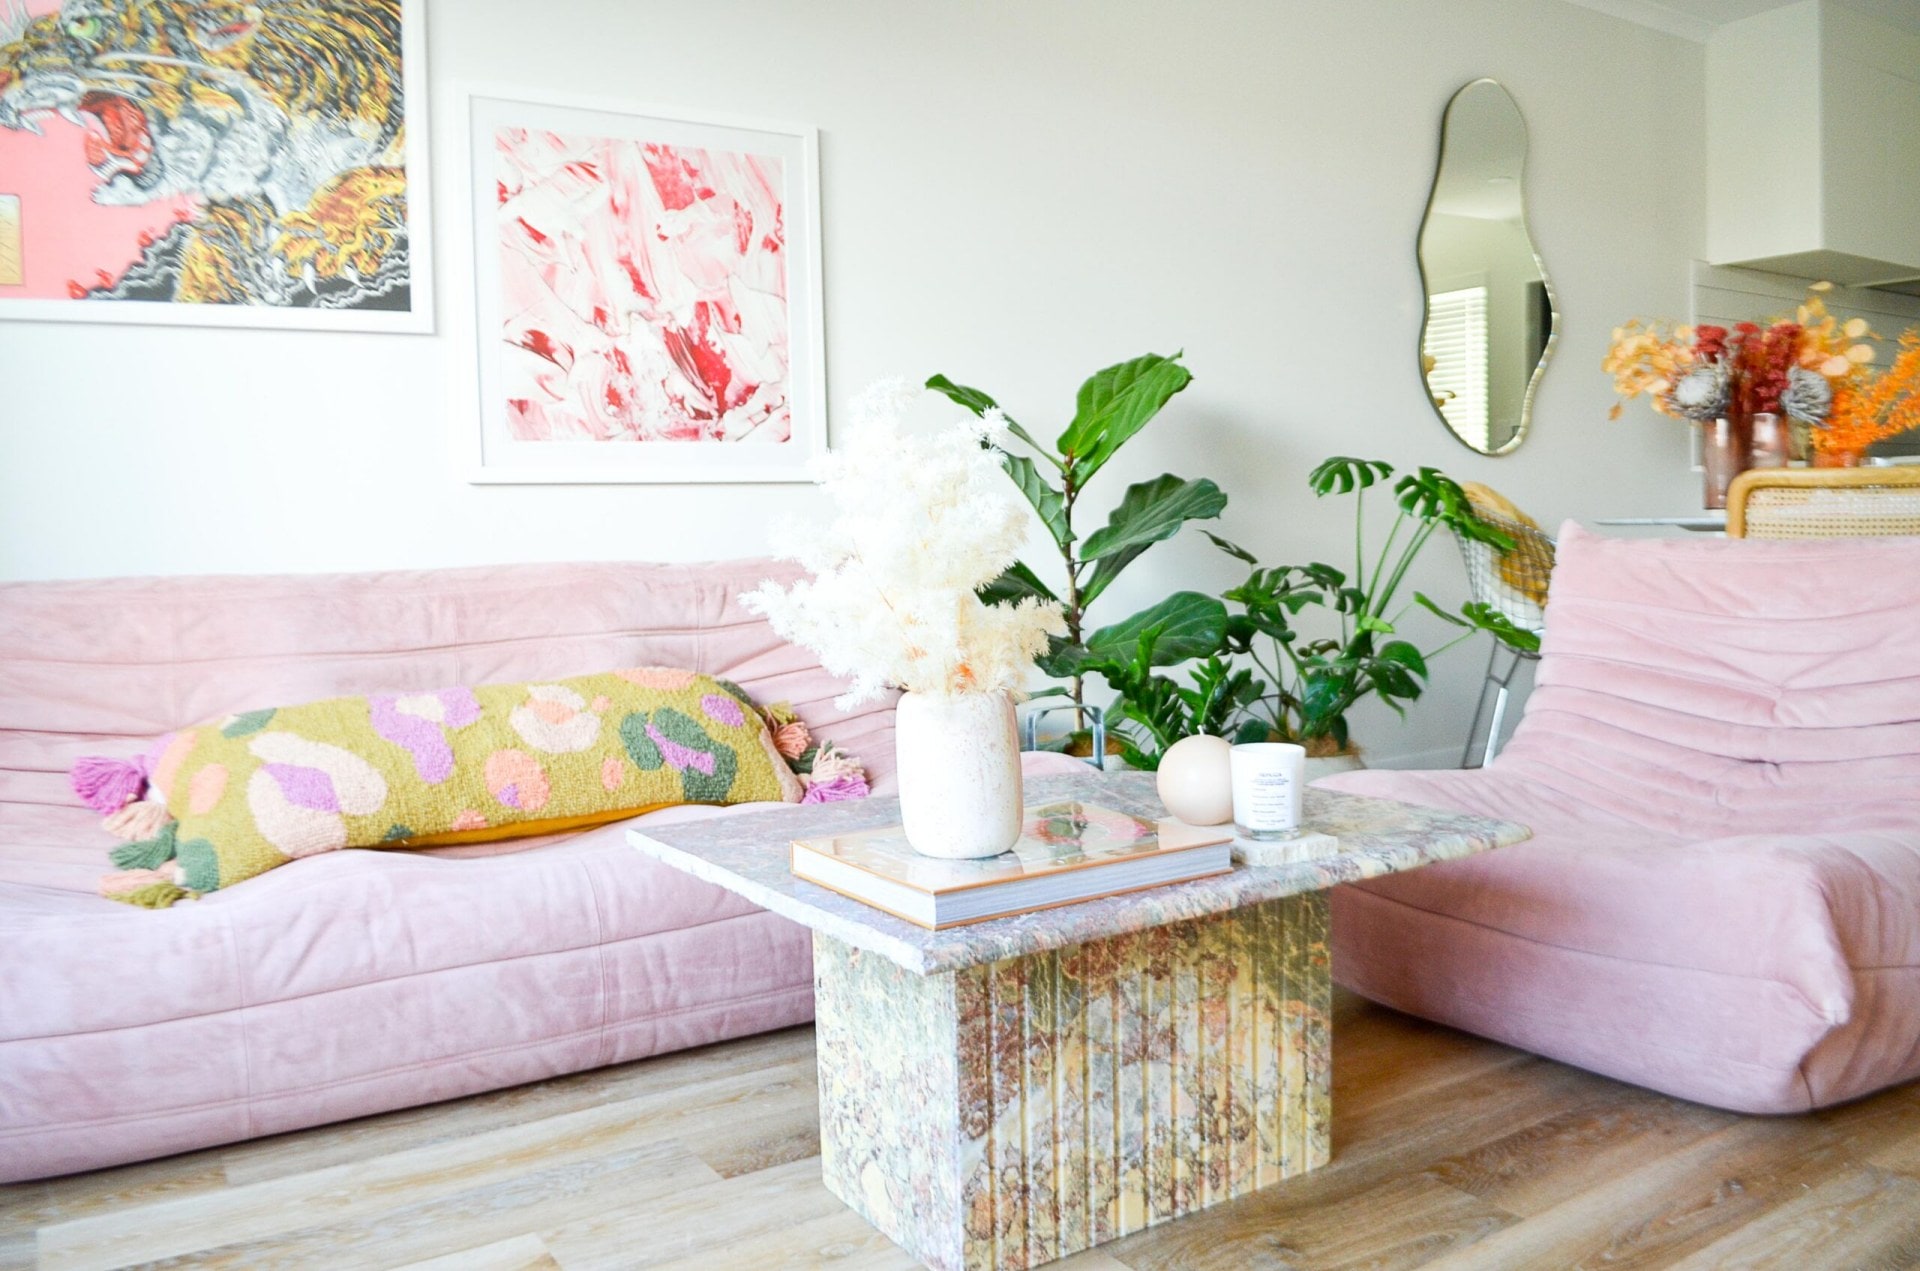 A lounge with a coffee table, a pink couch, matching chair, artwork and a mirror on the wall.